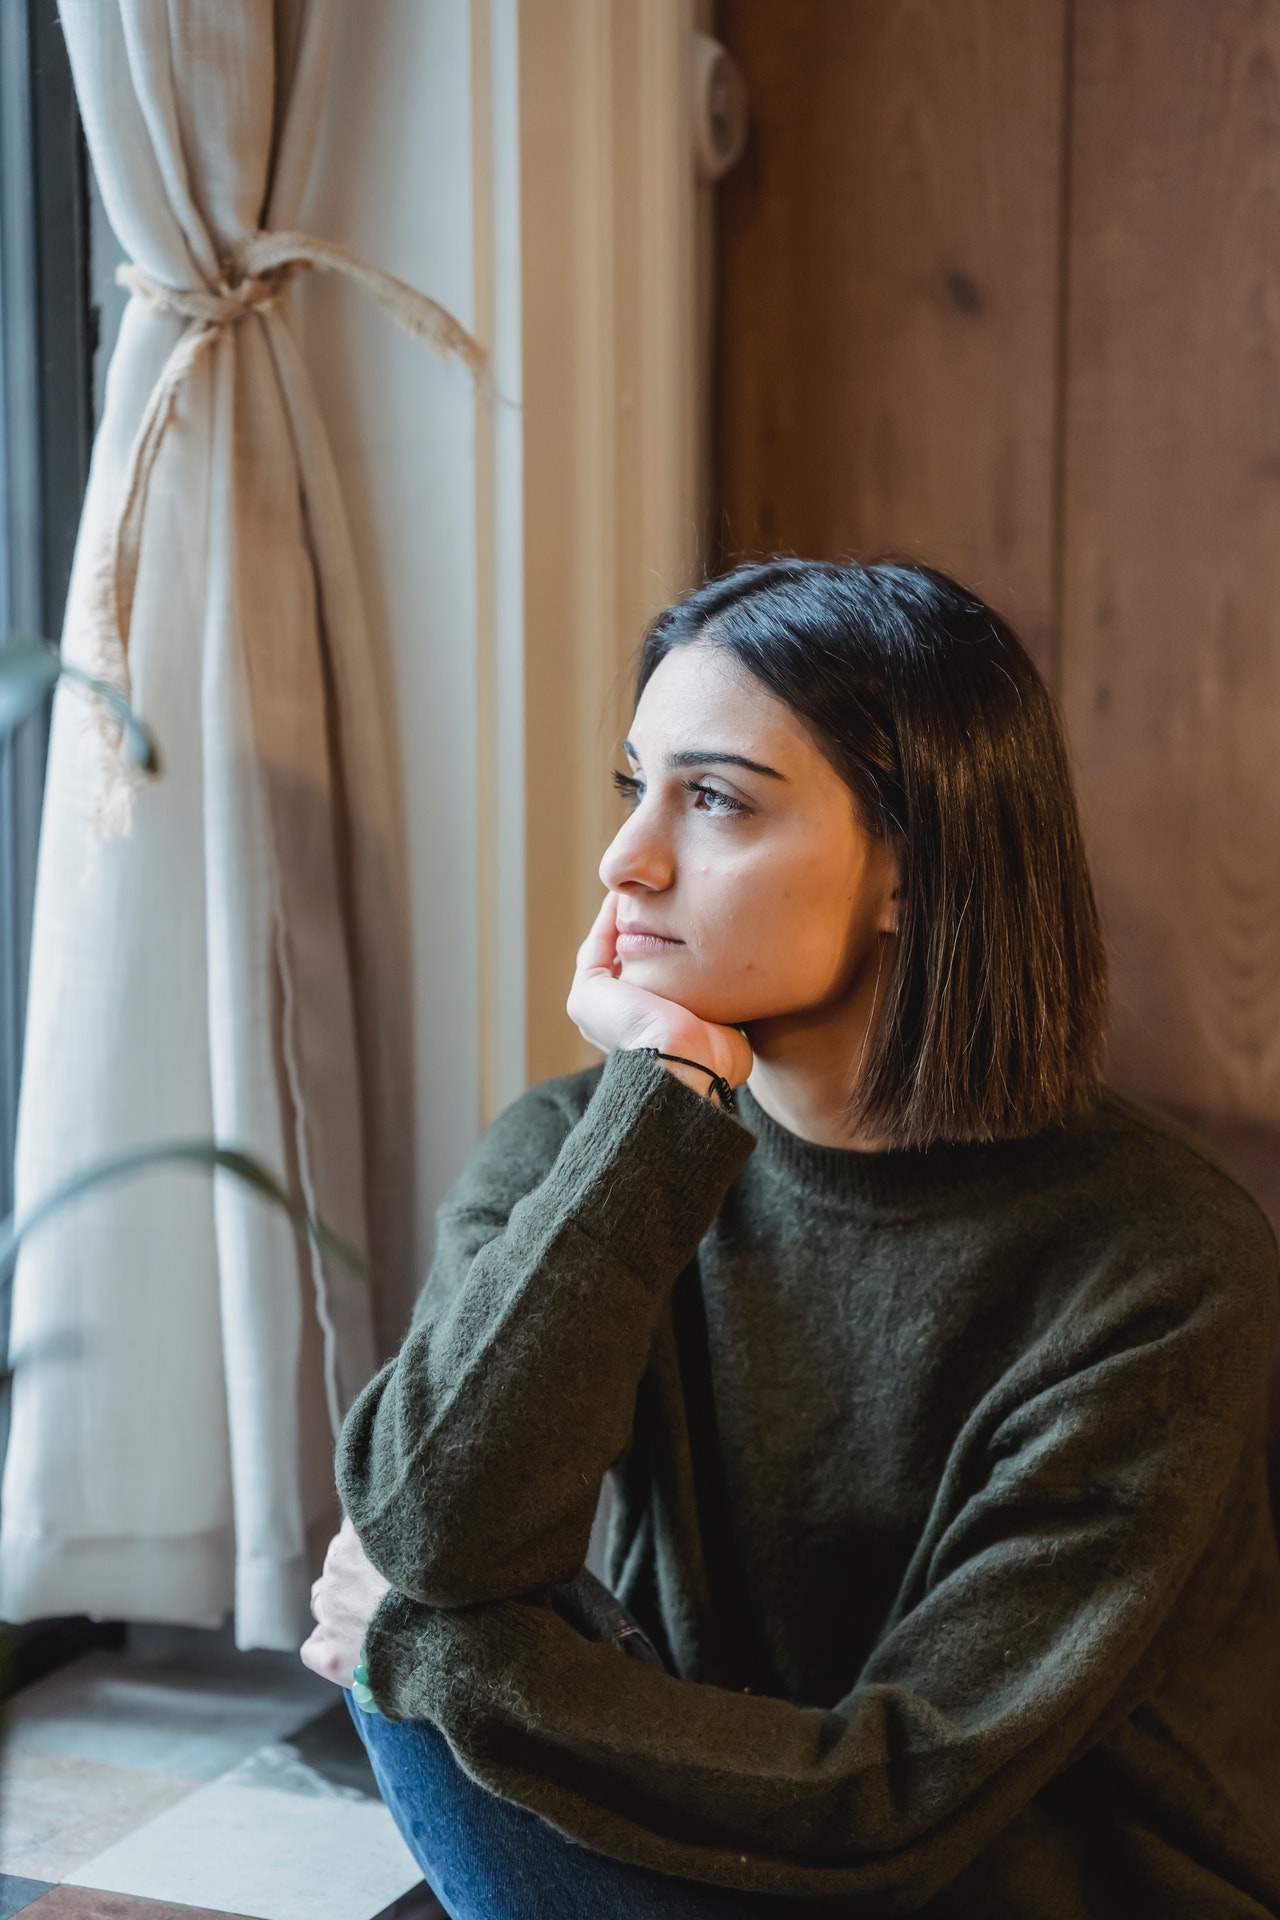 A woman rests her head against her hand while looking out hte window. Learn more about the support an anxiety therapist in Grand Rapids, MI can offer via depression treatment in Grand Rapids, MI. We offer depression treatment in Kent County, MI and other services.